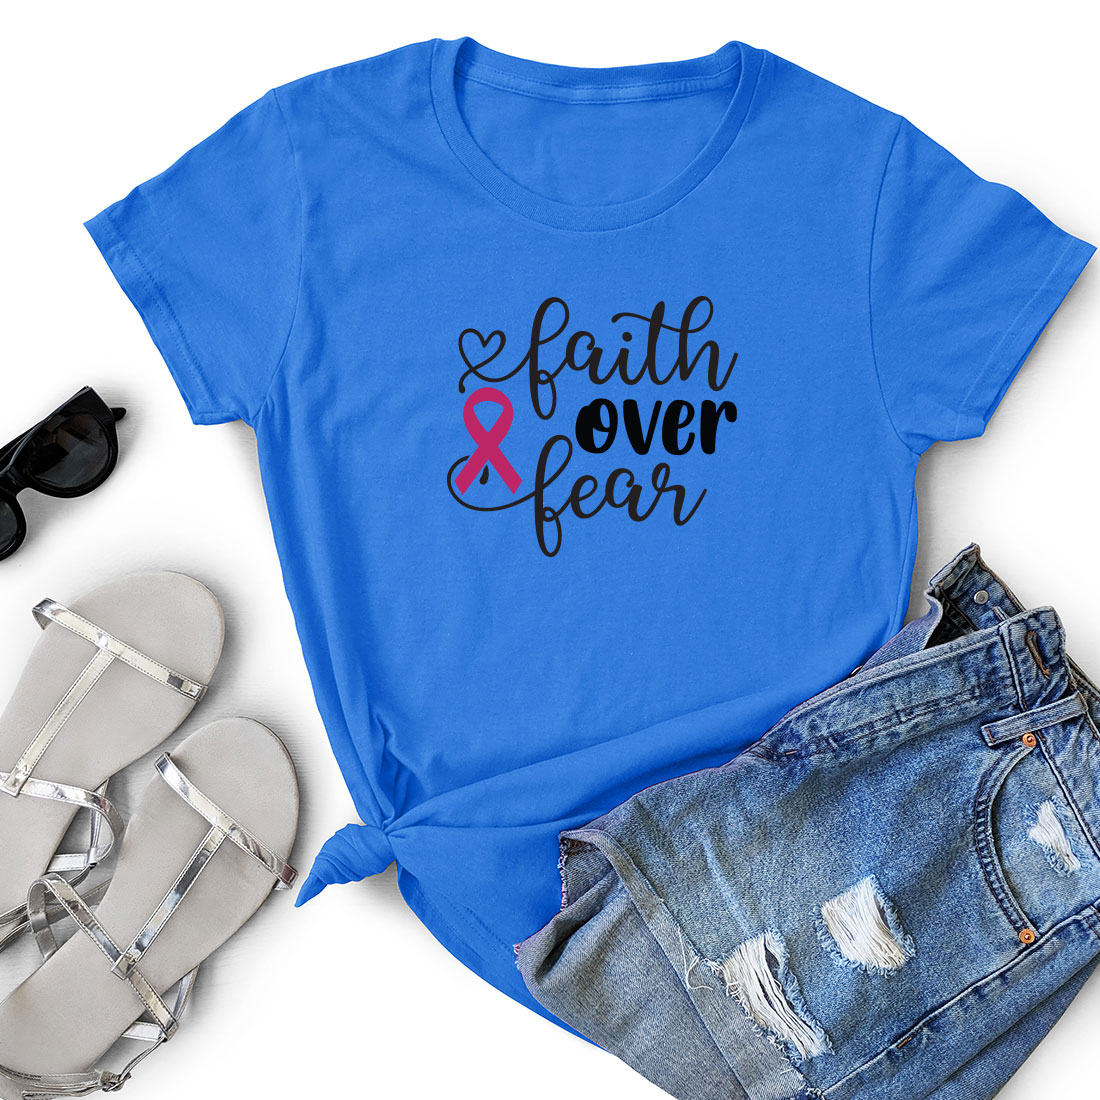 T - shirt that says faith over fear next to a pair of shorts.